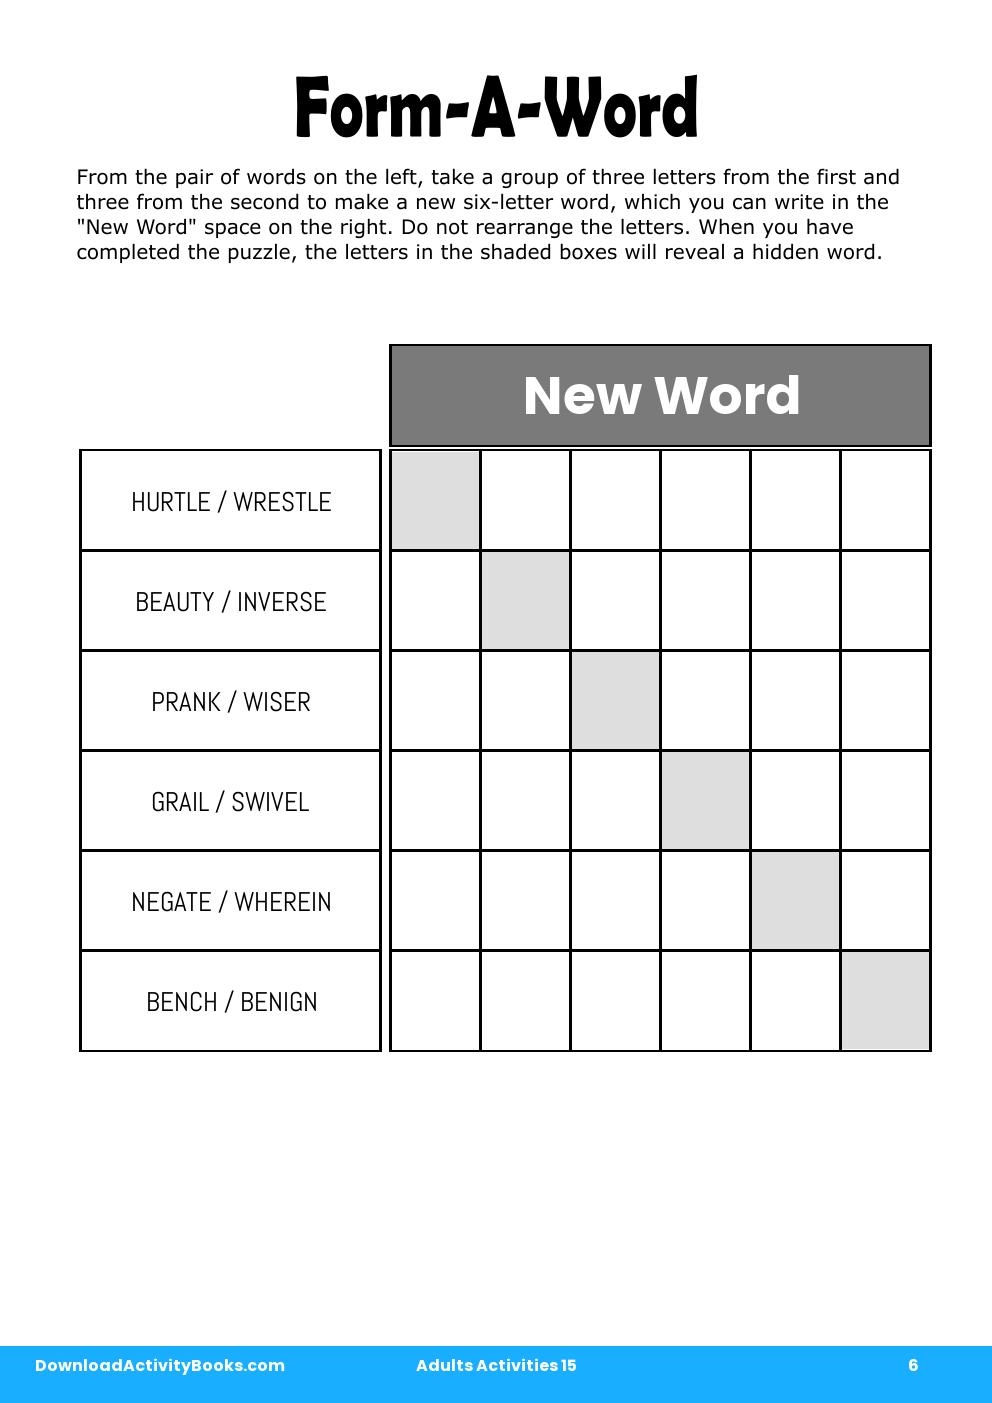 Form-A-Word in Adults Activities 15